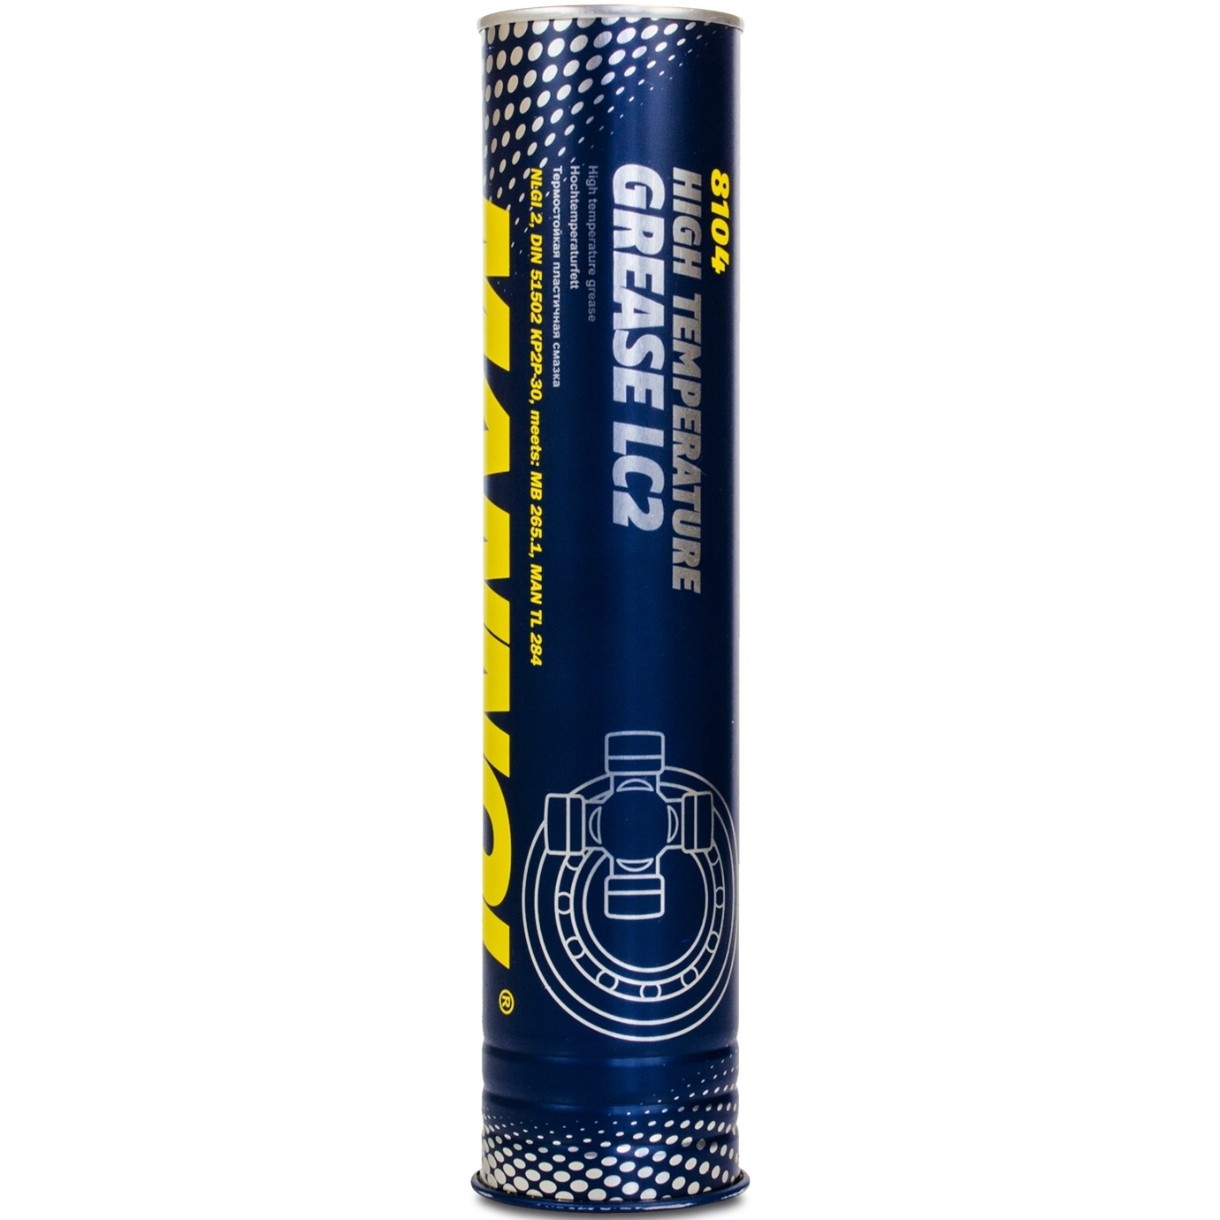 Unsoare Mannol High Temperature Grease LC-2 favorit  0.8kg